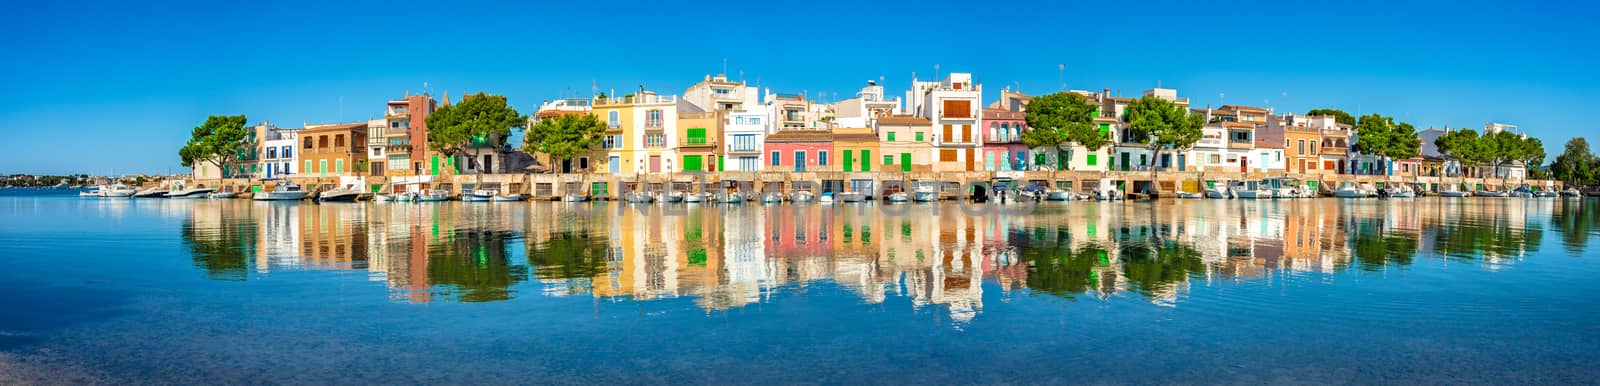 Beautiful panoramic view of waterfront with colorful buildings and boats of old fishing town Portocolom on Mallorca